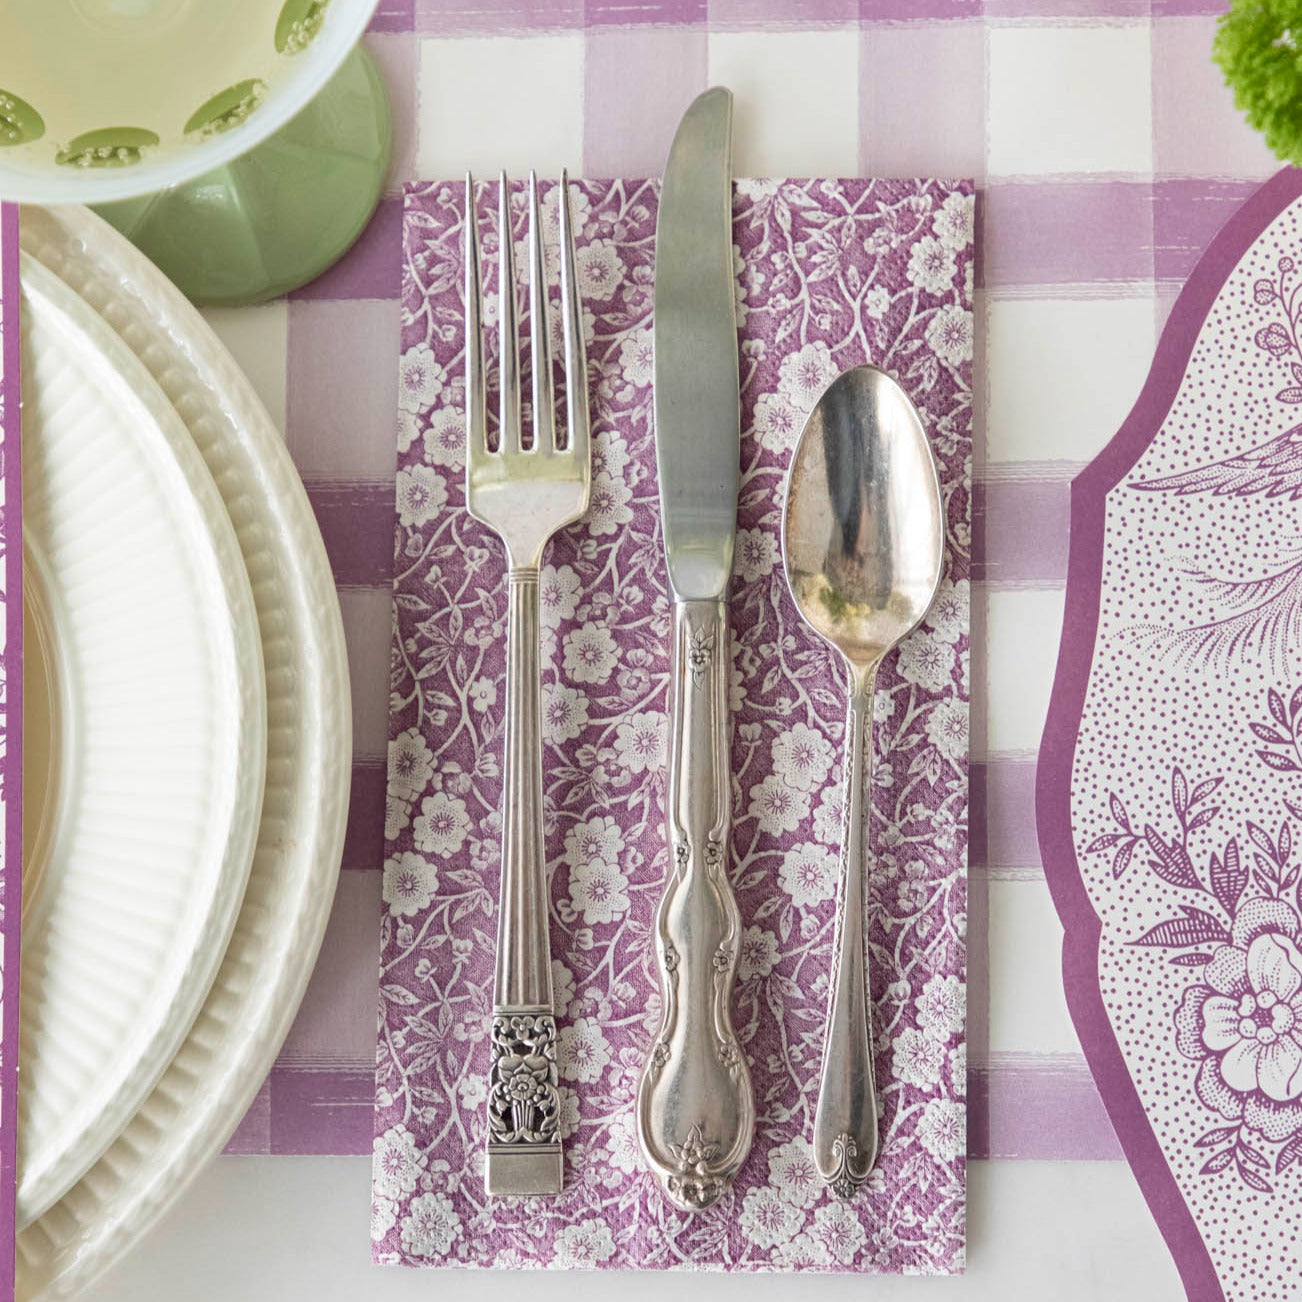 An exquisitely decorated Lilac Calico Napkins and white checkered table setting with beautiful silverware and utensils from Hester &amp; Cook.